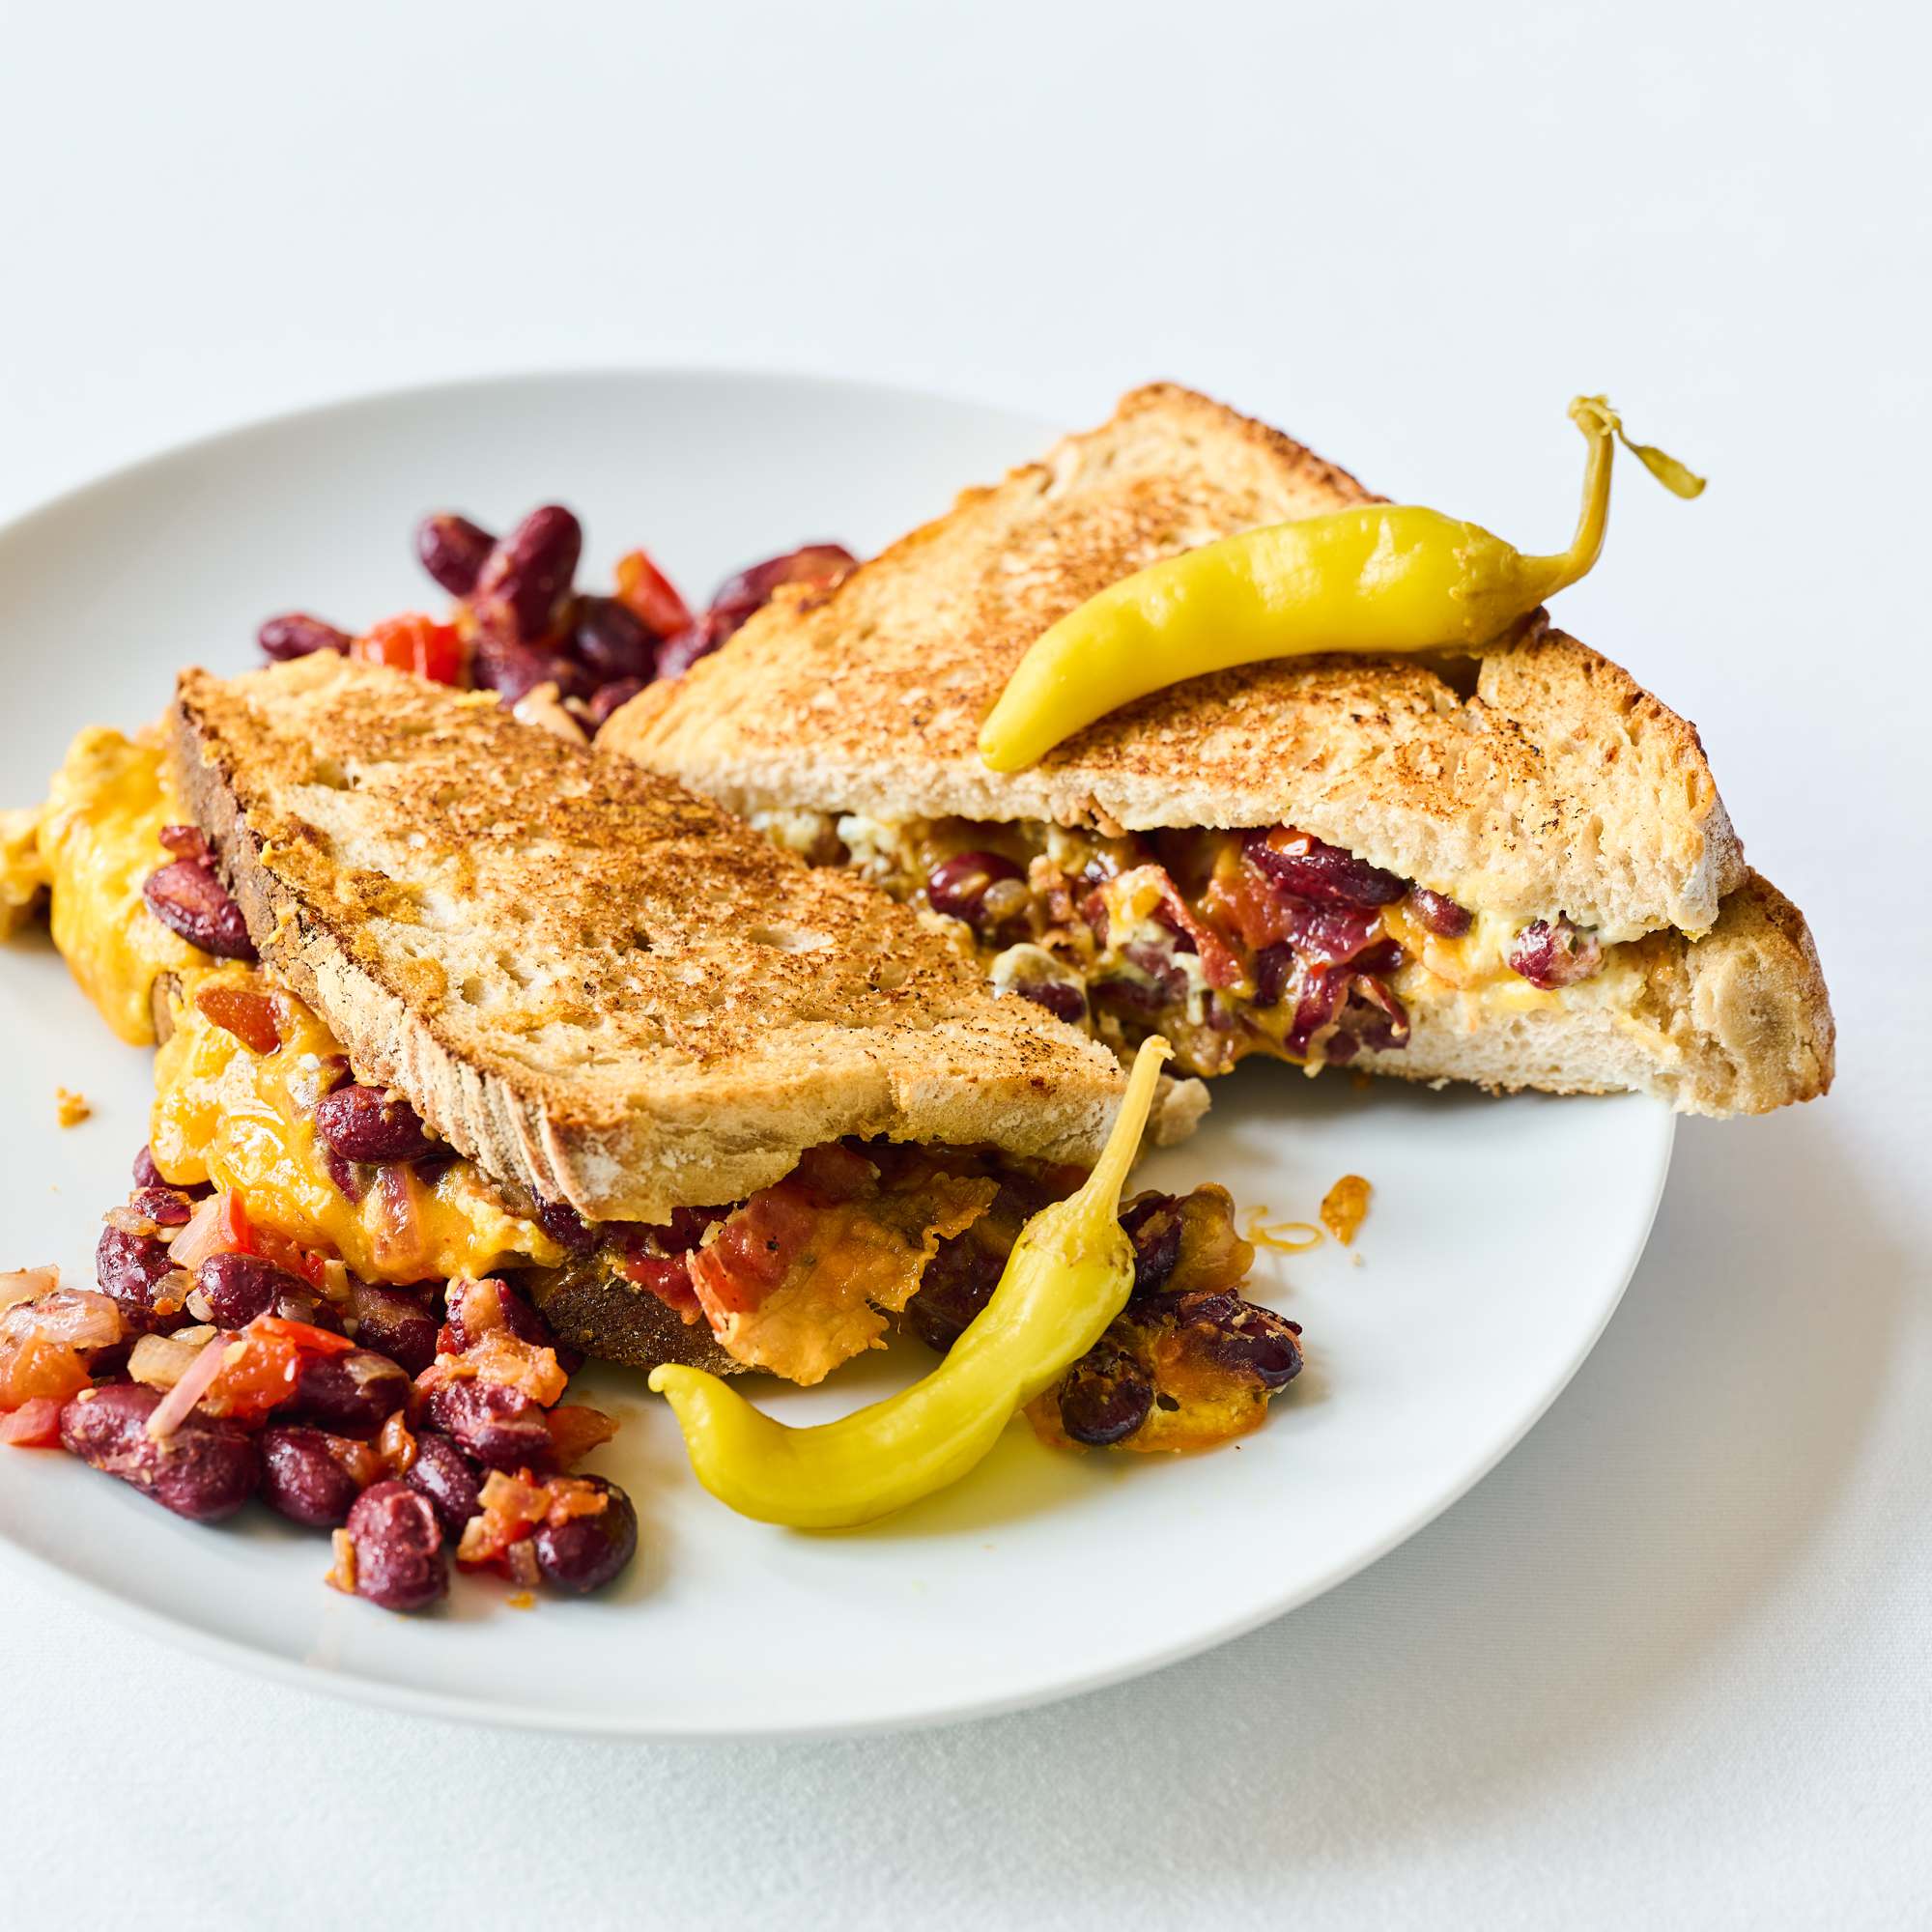 Grilled Cheese Chili Bean Sandwich